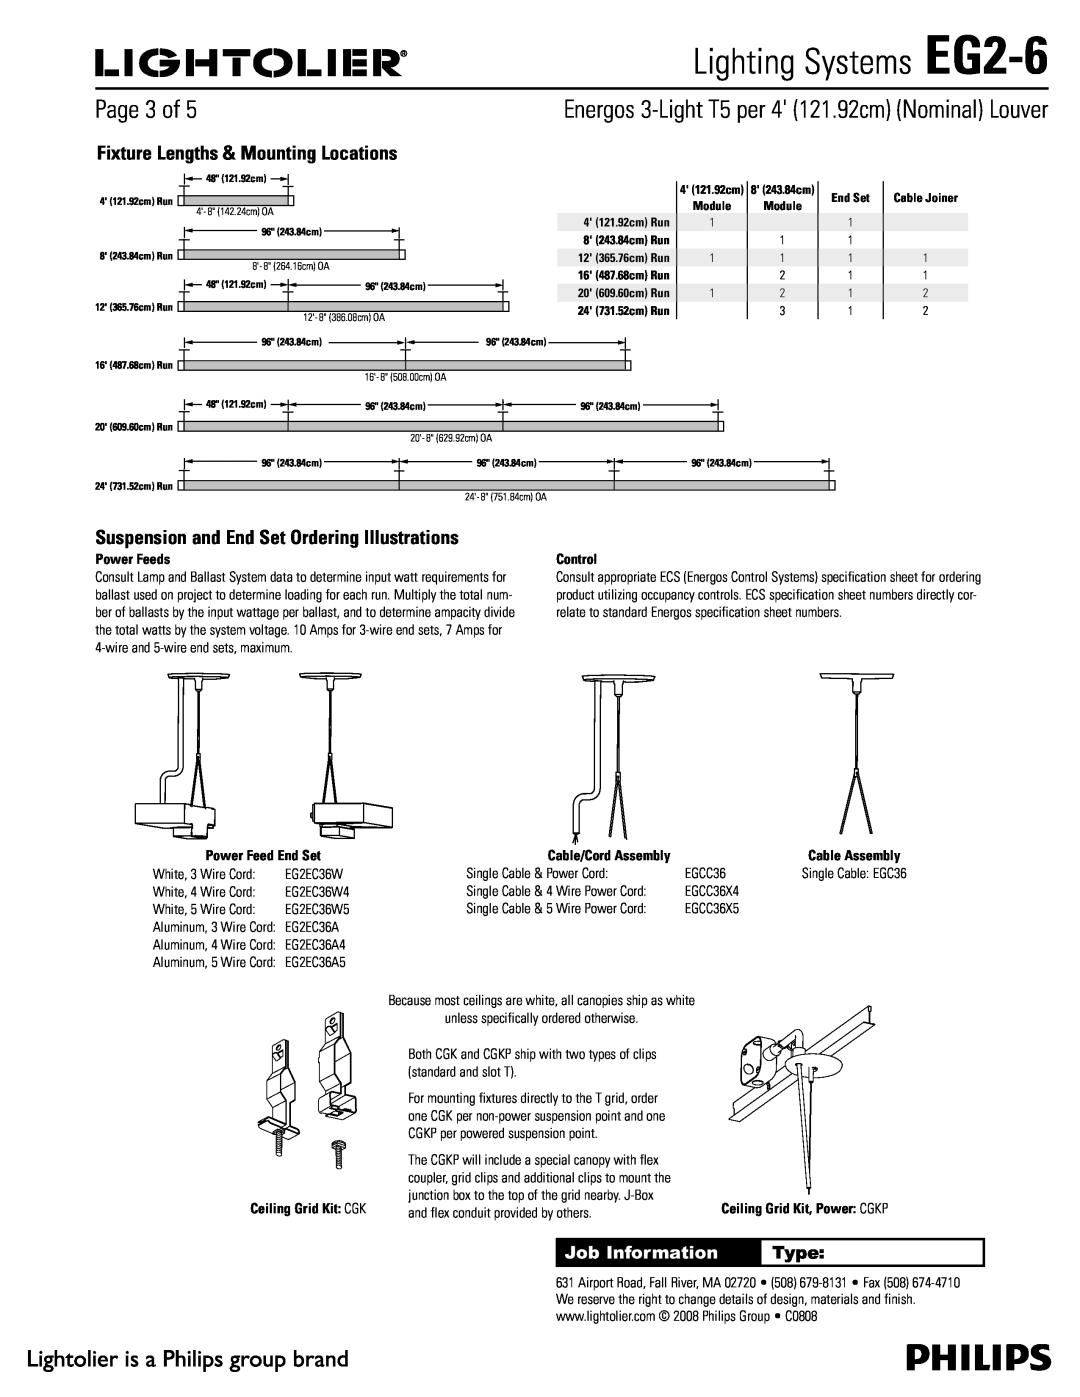 Lightolier Lighting Systems EG2-6, 1BHFPG, Job Information, Type, End Set, Cable Joiner, Cable/Cord Assembly 